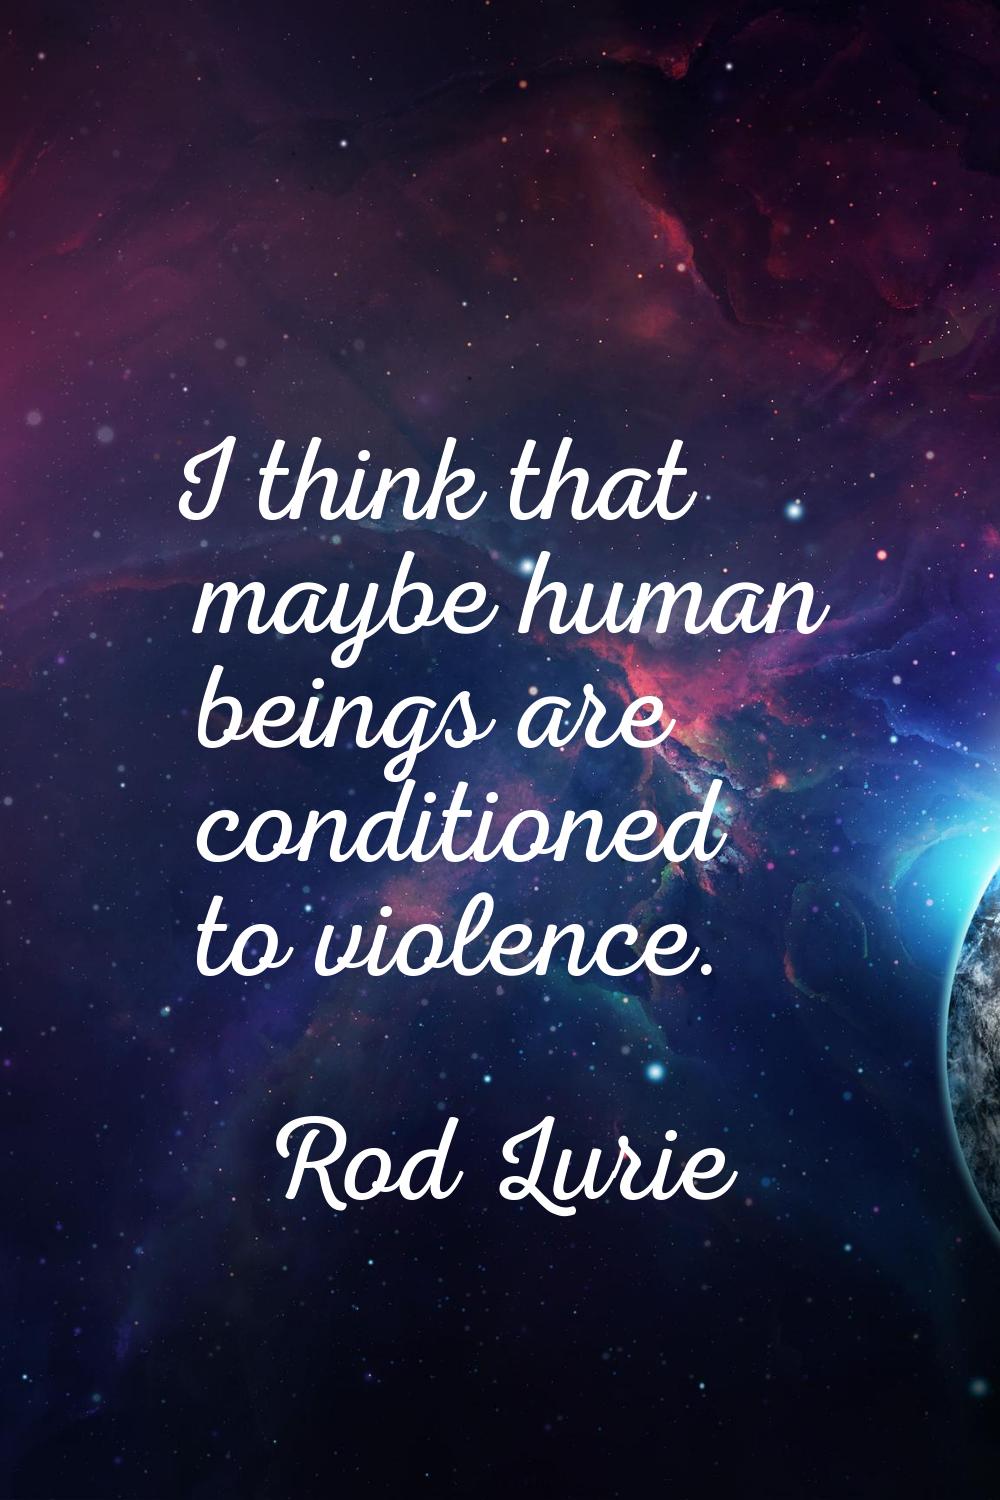 I think that maybe human beings are conditioned to violence.